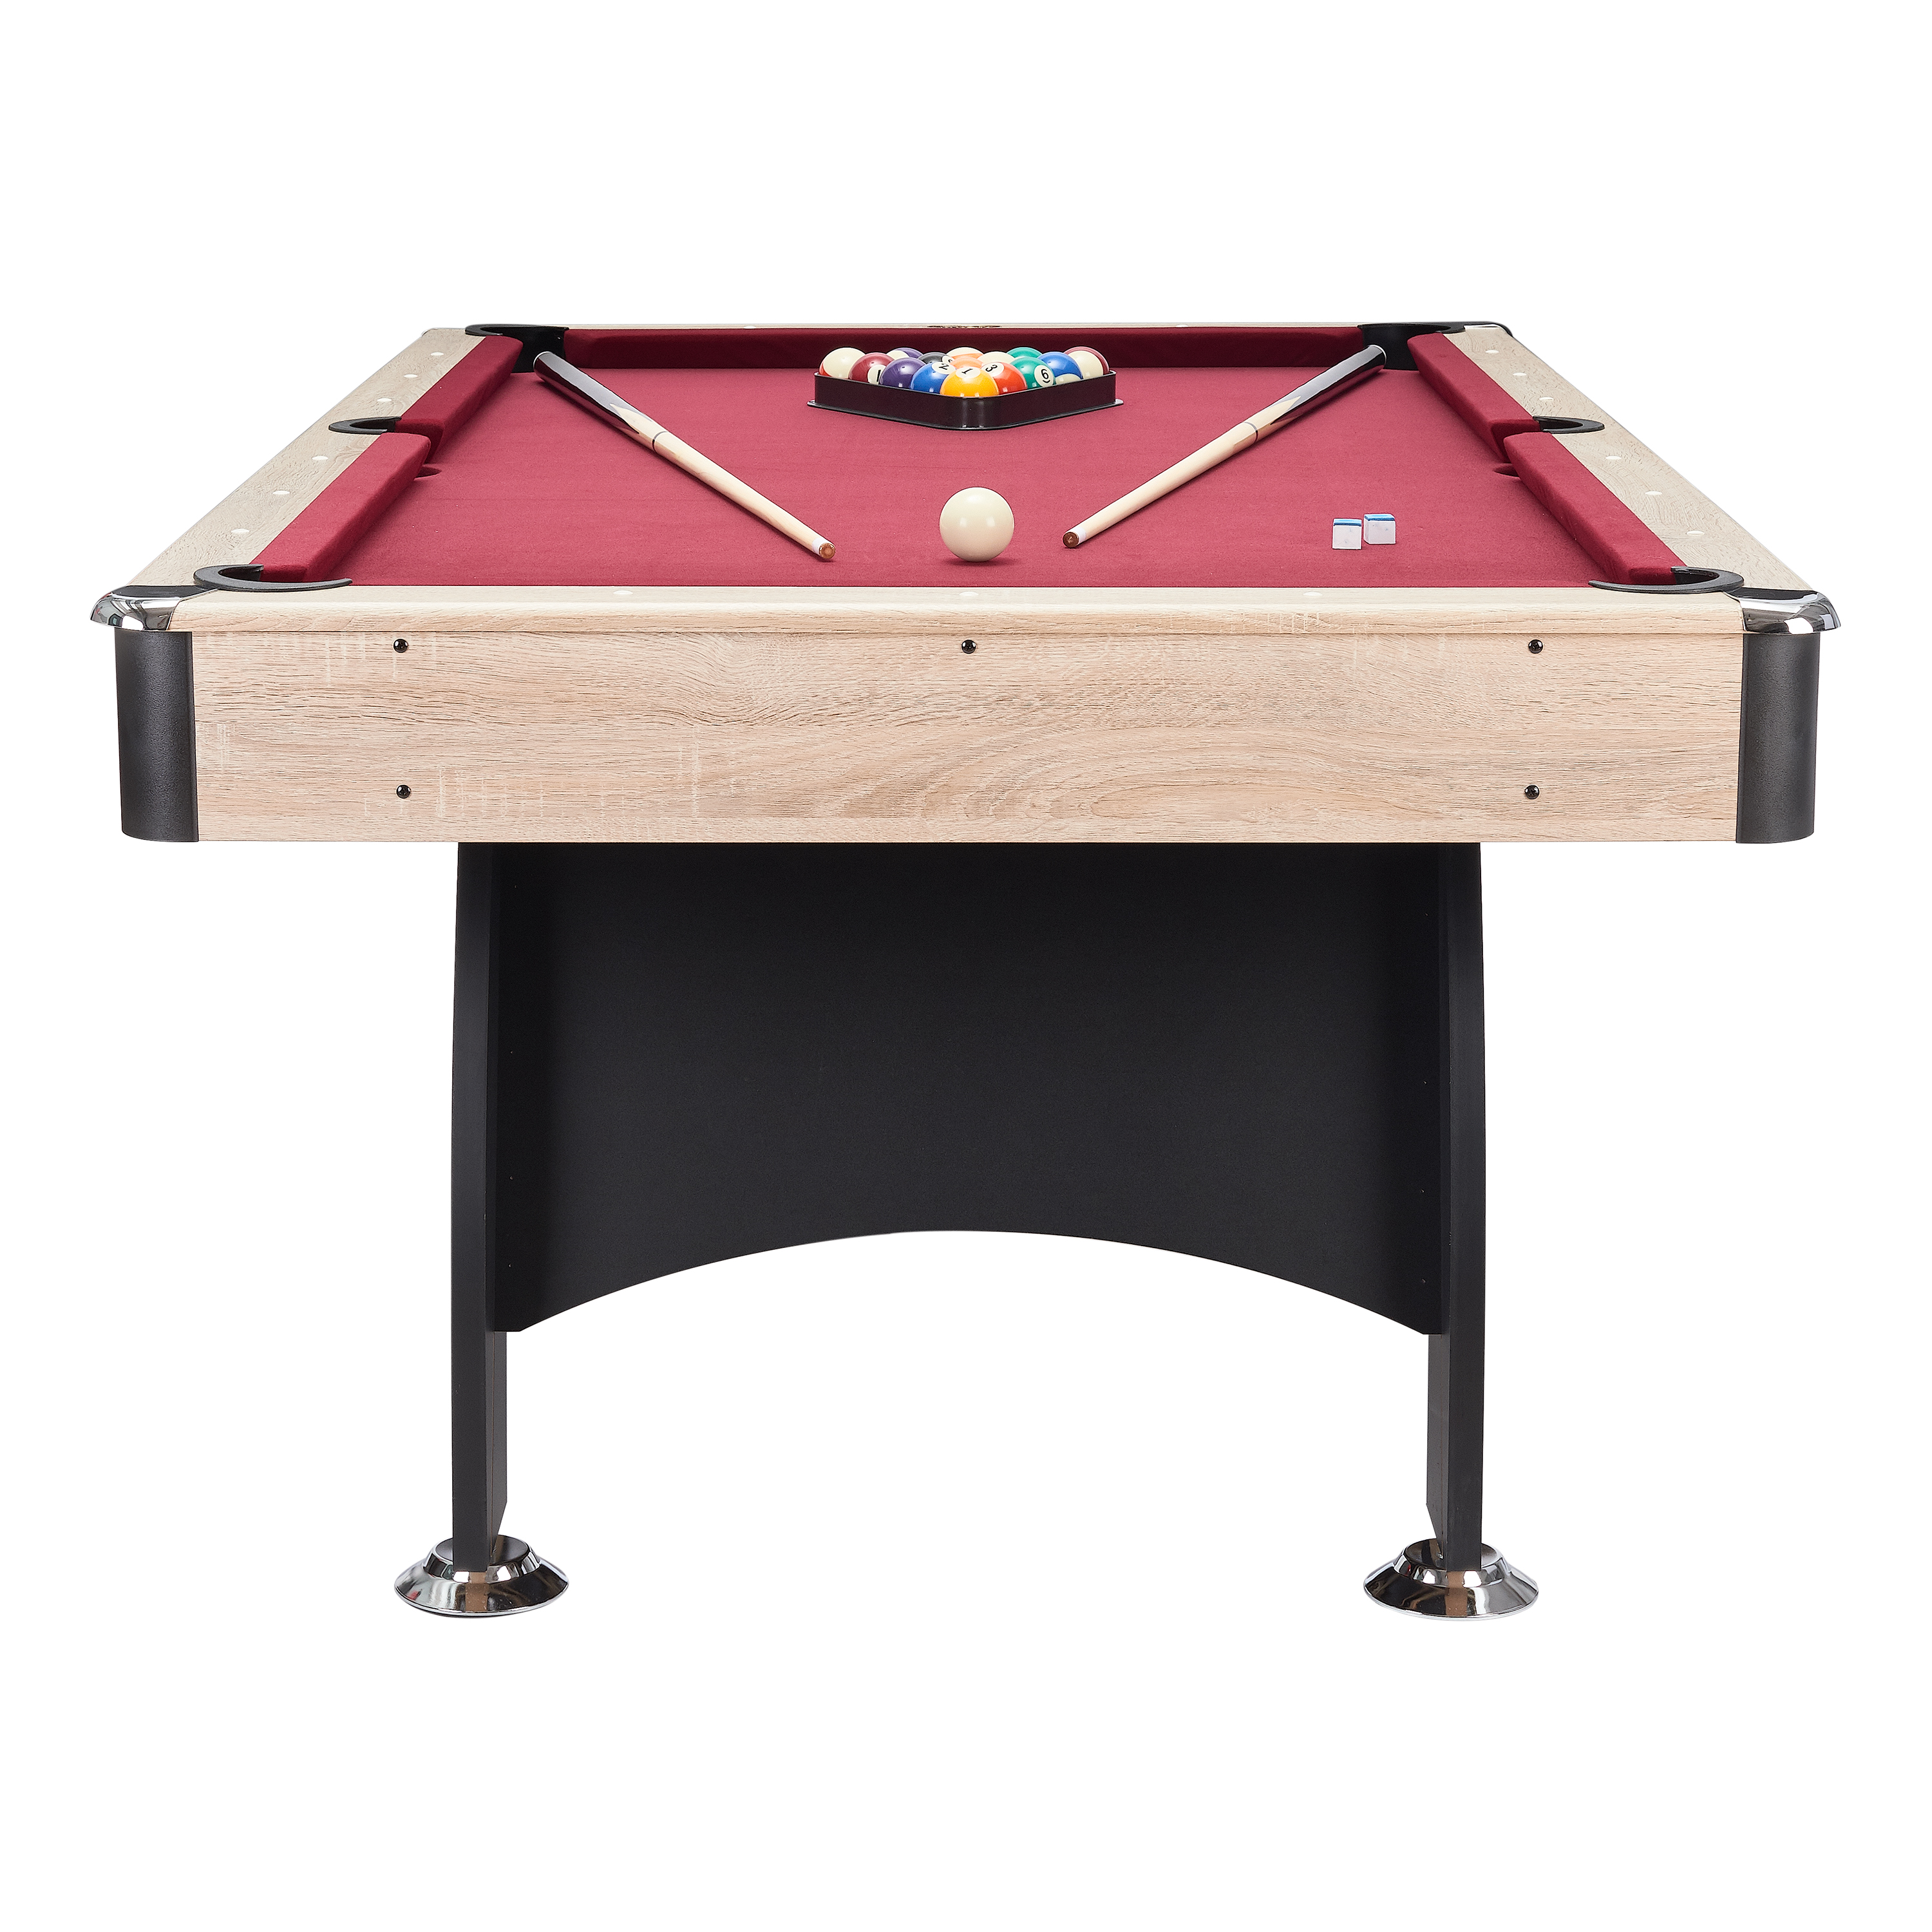 Airzone 84" Pool Table with Accessories, Red Felt - image 3 of 4